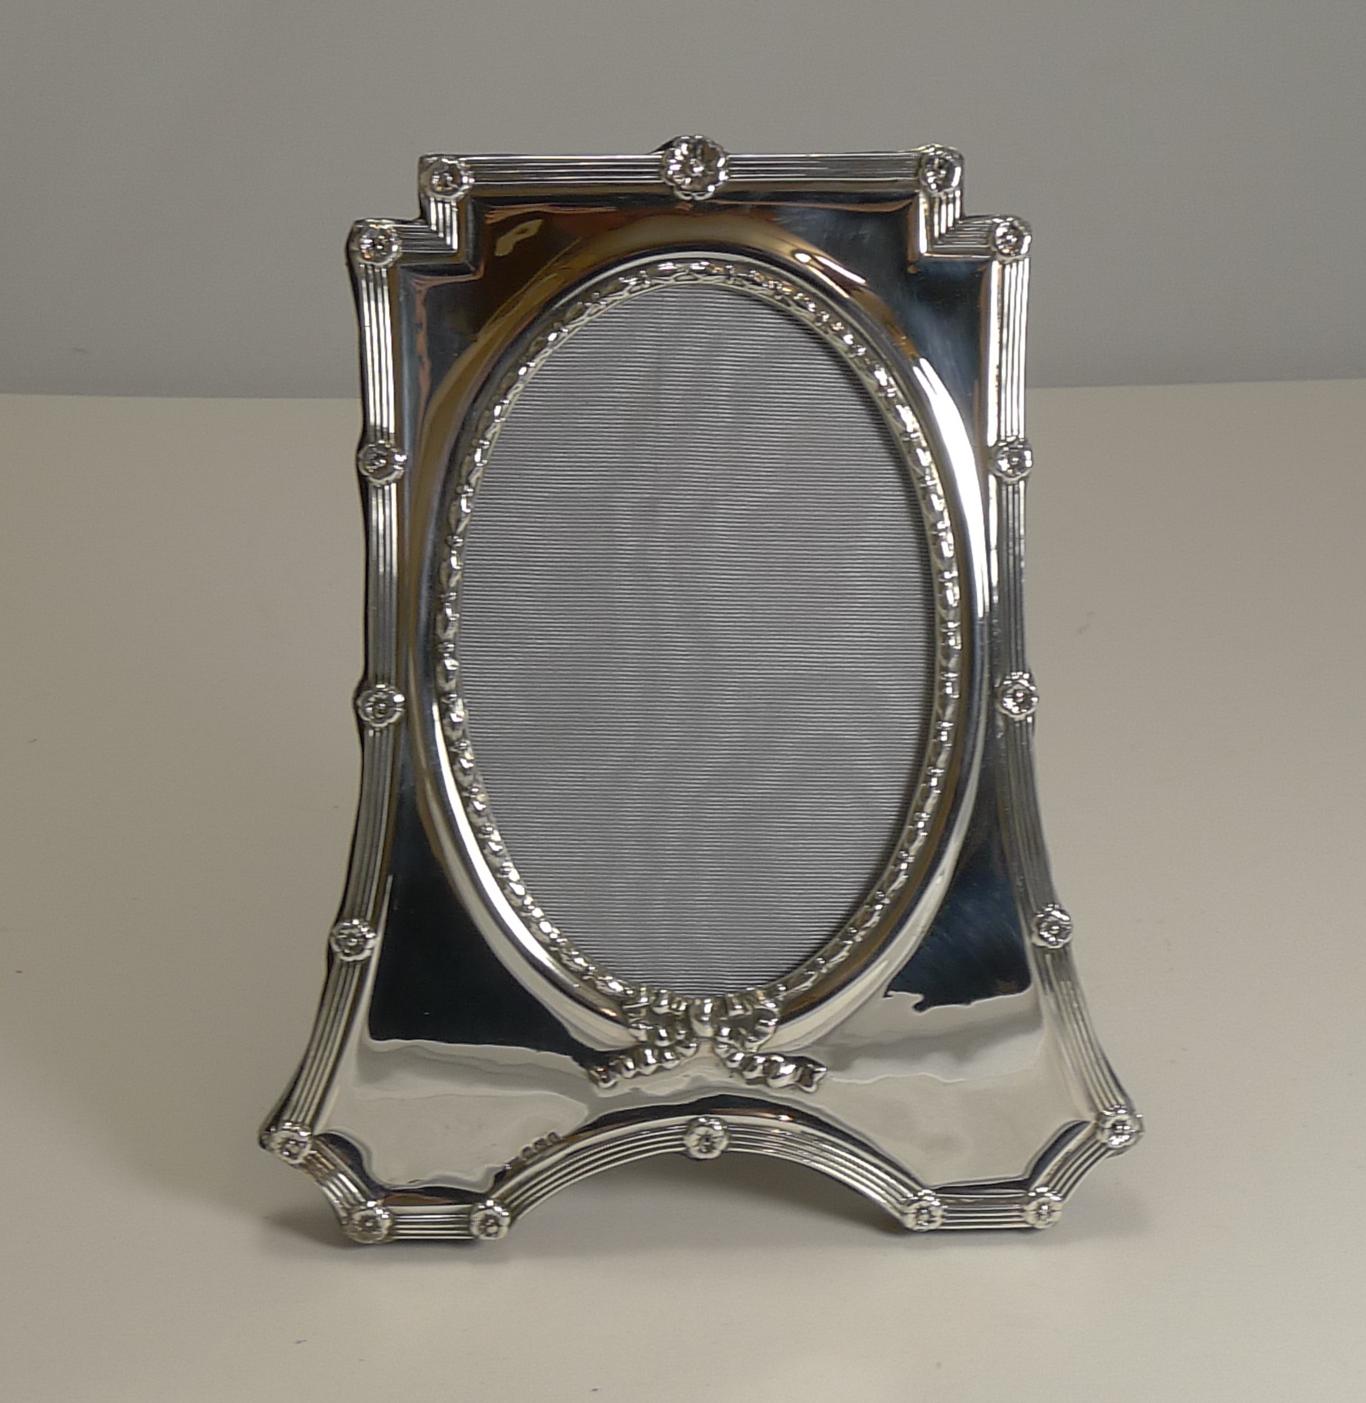 A beautifully shaped photograph frame made from English sterling silver with a solid oak backing with a folding easel stand.

The edge is decorated with a linear design punctuated with floral motifs; the oval aperture is surrounded with a raised